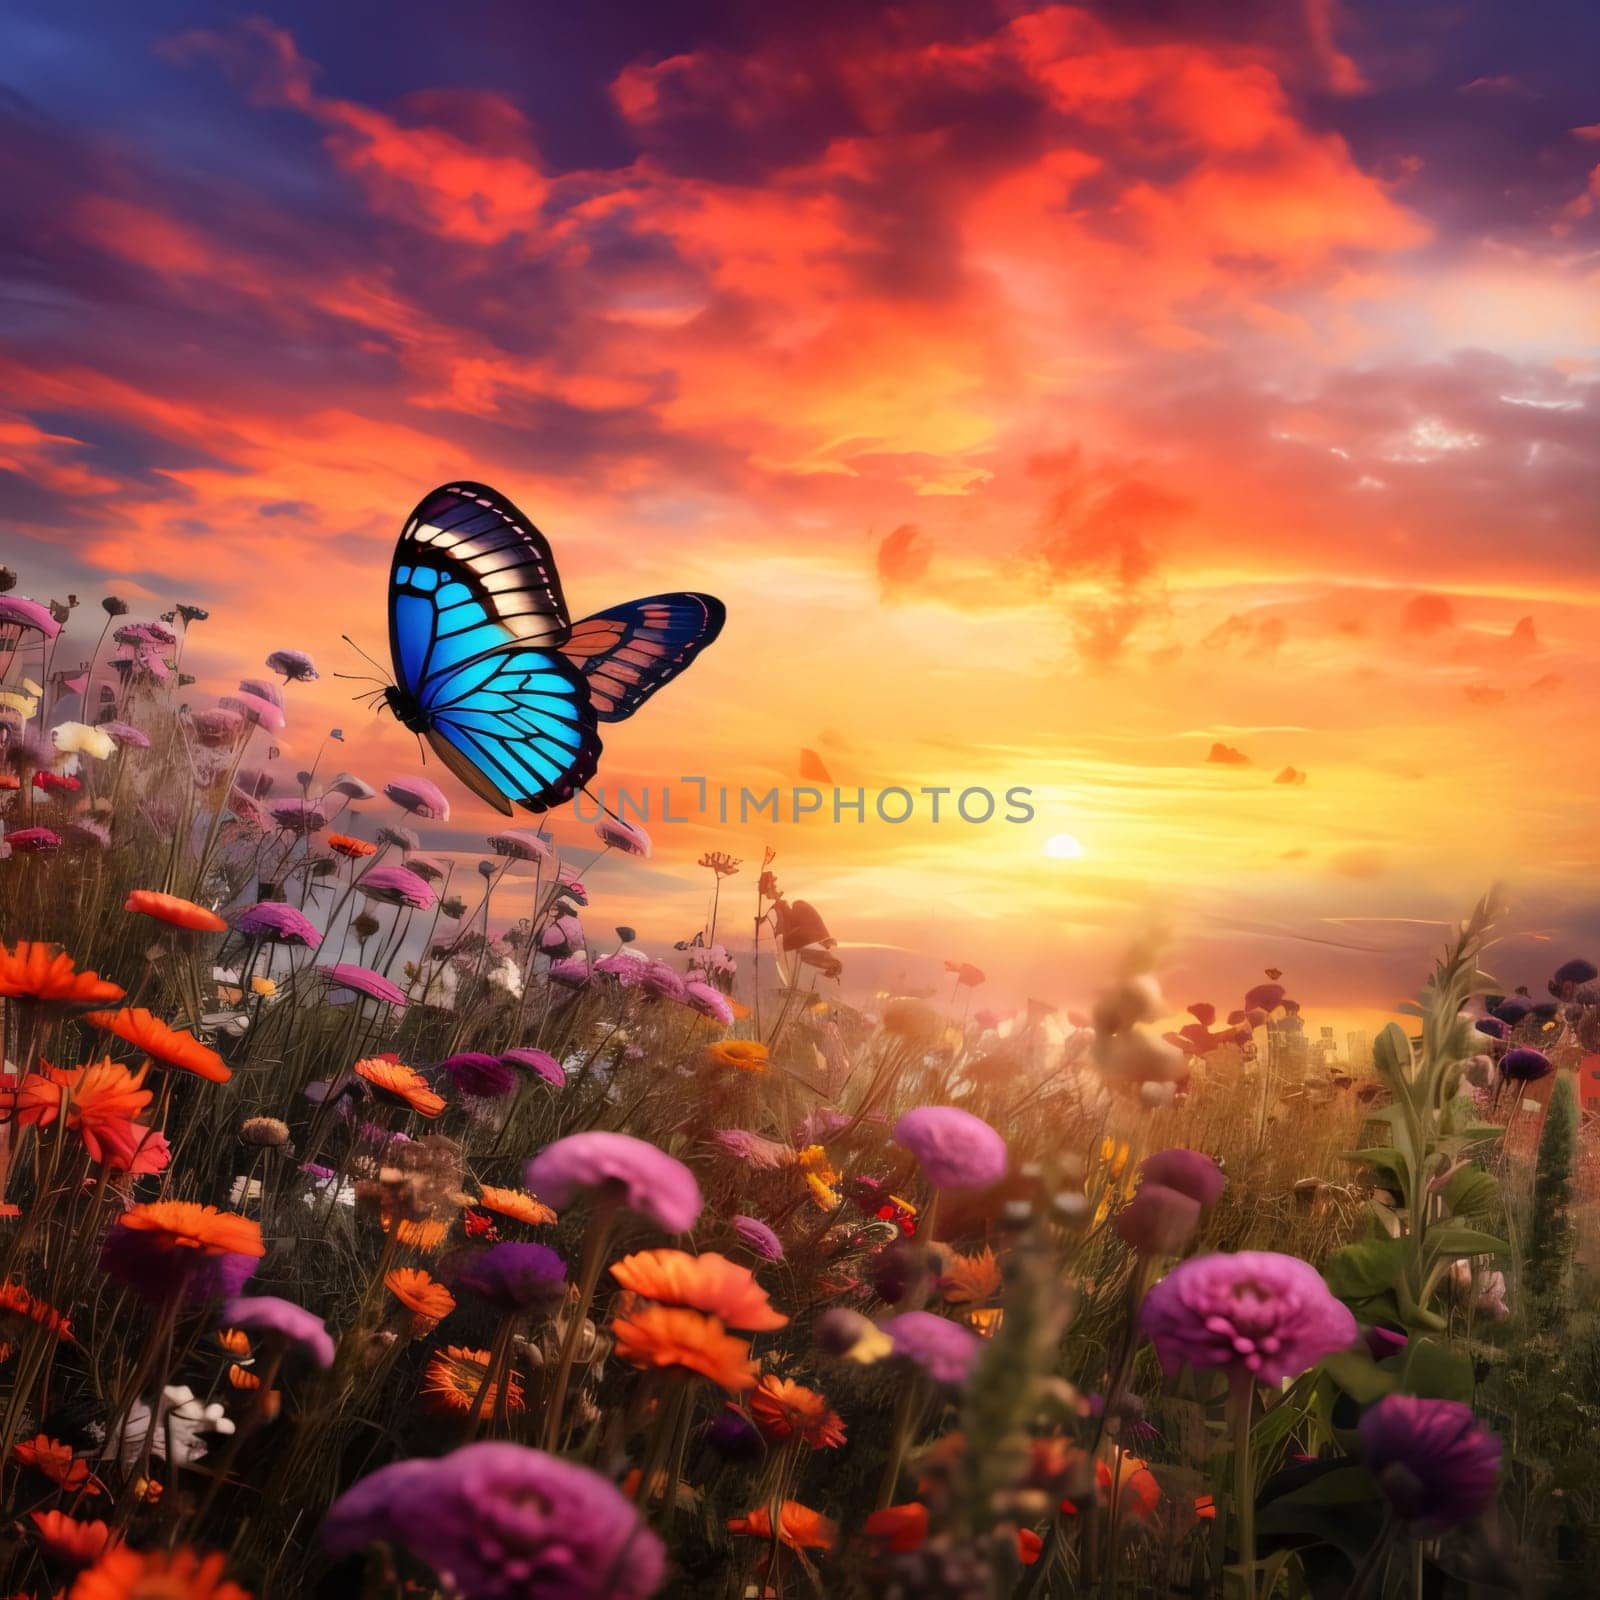 A meadow of colorful flowers, a flying butterfly and a beautiful setting sun. Flowering flowers, a symbol of spring, new life. A joyful time of nature waking up to life.